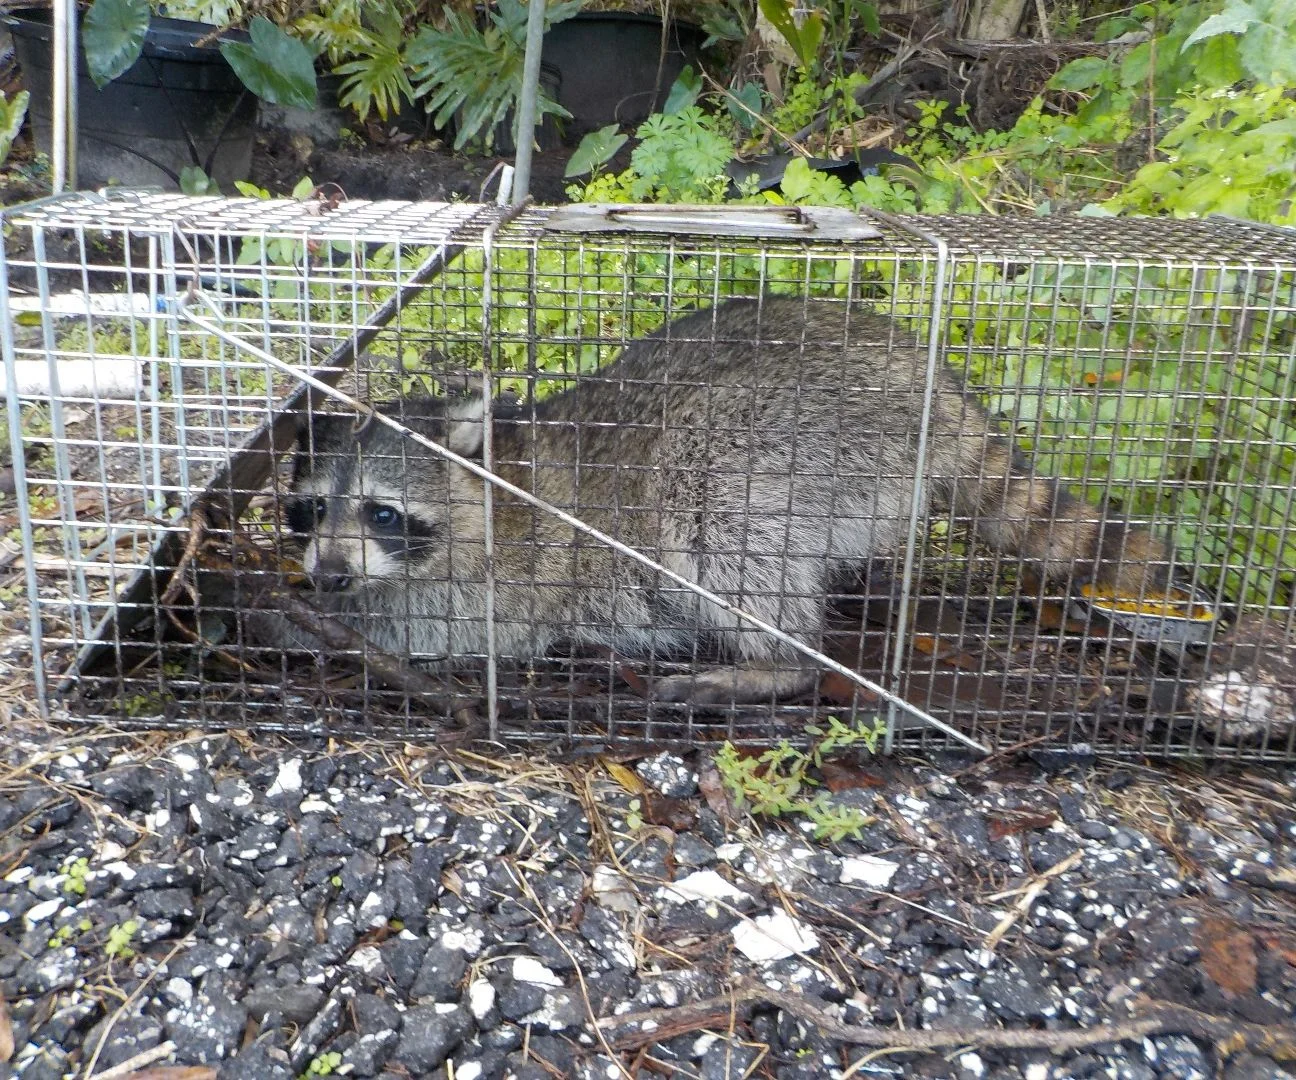 Give the raccoons some time to get familiar with – and comfortable around – the trap